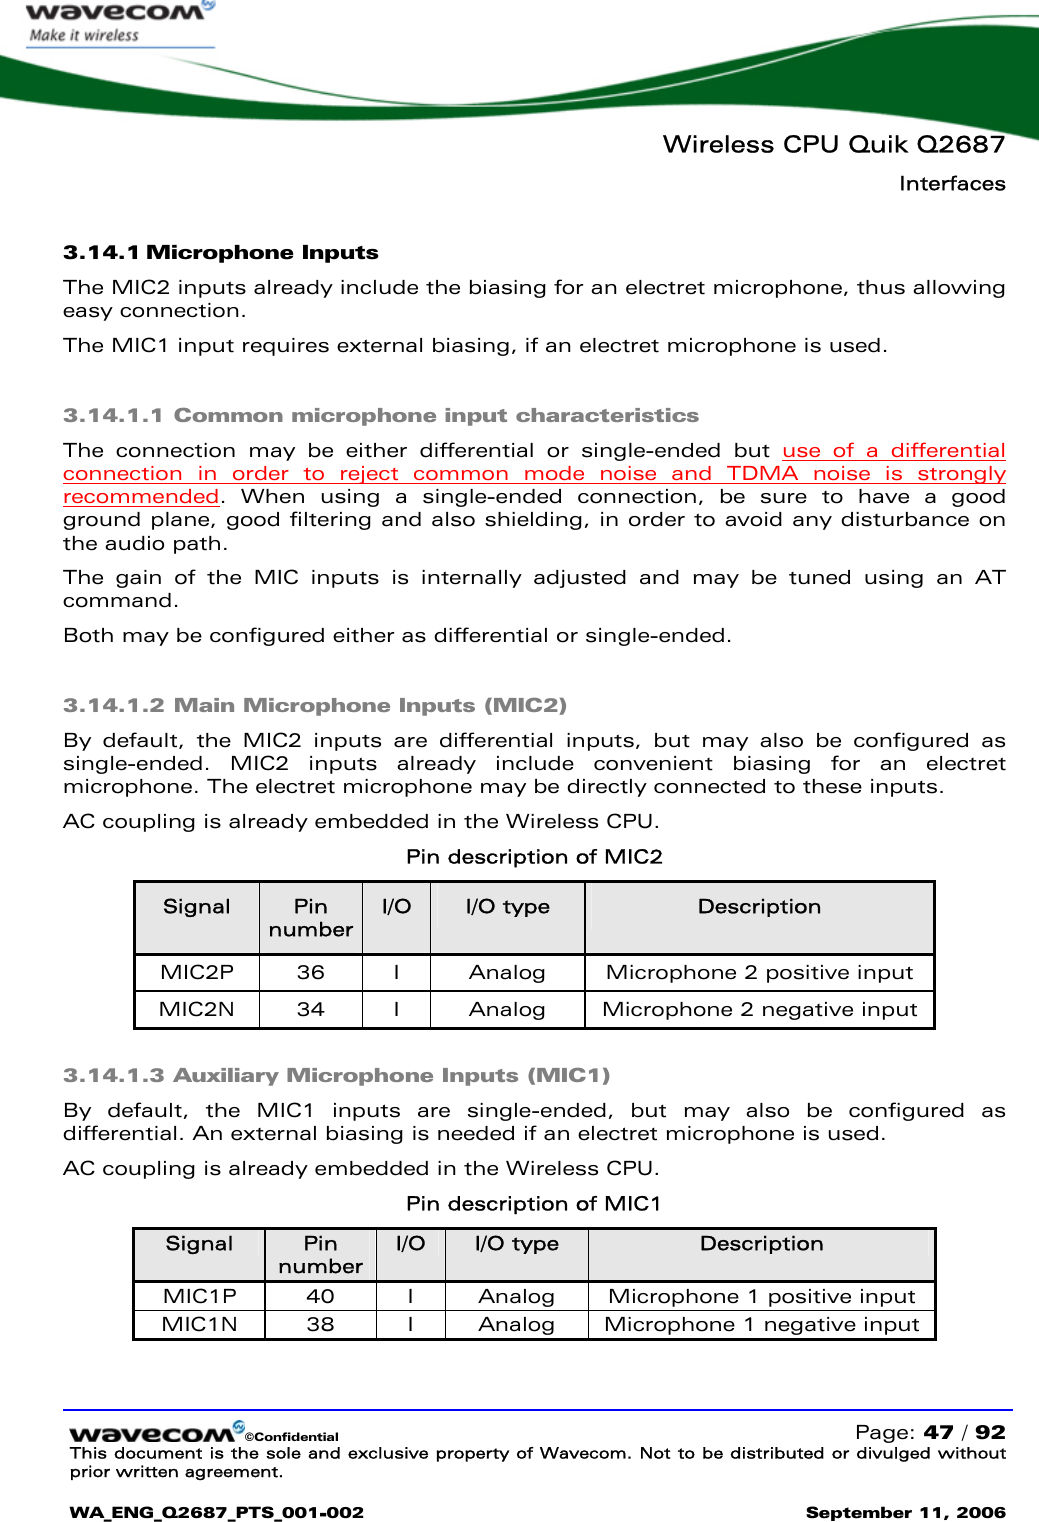   Wireless CPU Quik Q2687 Interfaces   ©Confidential   Page: 47 / 92 This document is the sole and exclusive property of Wavecom. Not to be distributed or divulged without prior written agreement.  WA_ENG_Q2687_PTS_001-002 September 11, 2006   3.14.1 Microphone Inputs The MIC2 inputs already include the biasing for an electret microphone, thus allowing easy connection. The MIC1 input requires external biasing, if an electret microphone is used. 3.14.1.1 Common microphone input characteristics The connection may be either differential or single-ended but use of a differential connection in order to reject common mode noise and TDMA noise is strongly recommended. When using a single-ended connection, be sure to have a good ground plane, good filtering and also shielding, in order to avoid any disturbance on the audio path. The gain of the MIC inputs is internally adjusted and may be tuned using an AT command. Both may be configured either as differential or single-ended. 3.14.1.2 Main Microphone Inputs (MIC2) By default, the MIC2 inputs are differential inputs, but may also be configured as single-ended. MIC2 inputs already include convenient biasing for an electret microphone. The electret microphone may be directly connected to these inputs.  AC coupling is already embedded in the Wireless CPU. Pin description of MIC2 Signal  Pin number I/O  I/O type  Description MIC2P  36  I  Analog  Microphone 2 positive input MIC2N  34  I  Analog  Microphone 2 negative input  3.14.1.3 Auxiliary Microphone Inputs (MIC1) By default, the MIC1 inputs are single-ended, but may also be configured as differential. An external biasing is needed if an electret microphone is used. AC coupling is already embedded in the Wireless CPU. Pin description of MIC1 Signal  Pin number I/O  I/O type  Description MIC1P  40  I  Analog  Microphone 1 positive input MIC1N  38  I  Analog  Microphone 1 negative input  